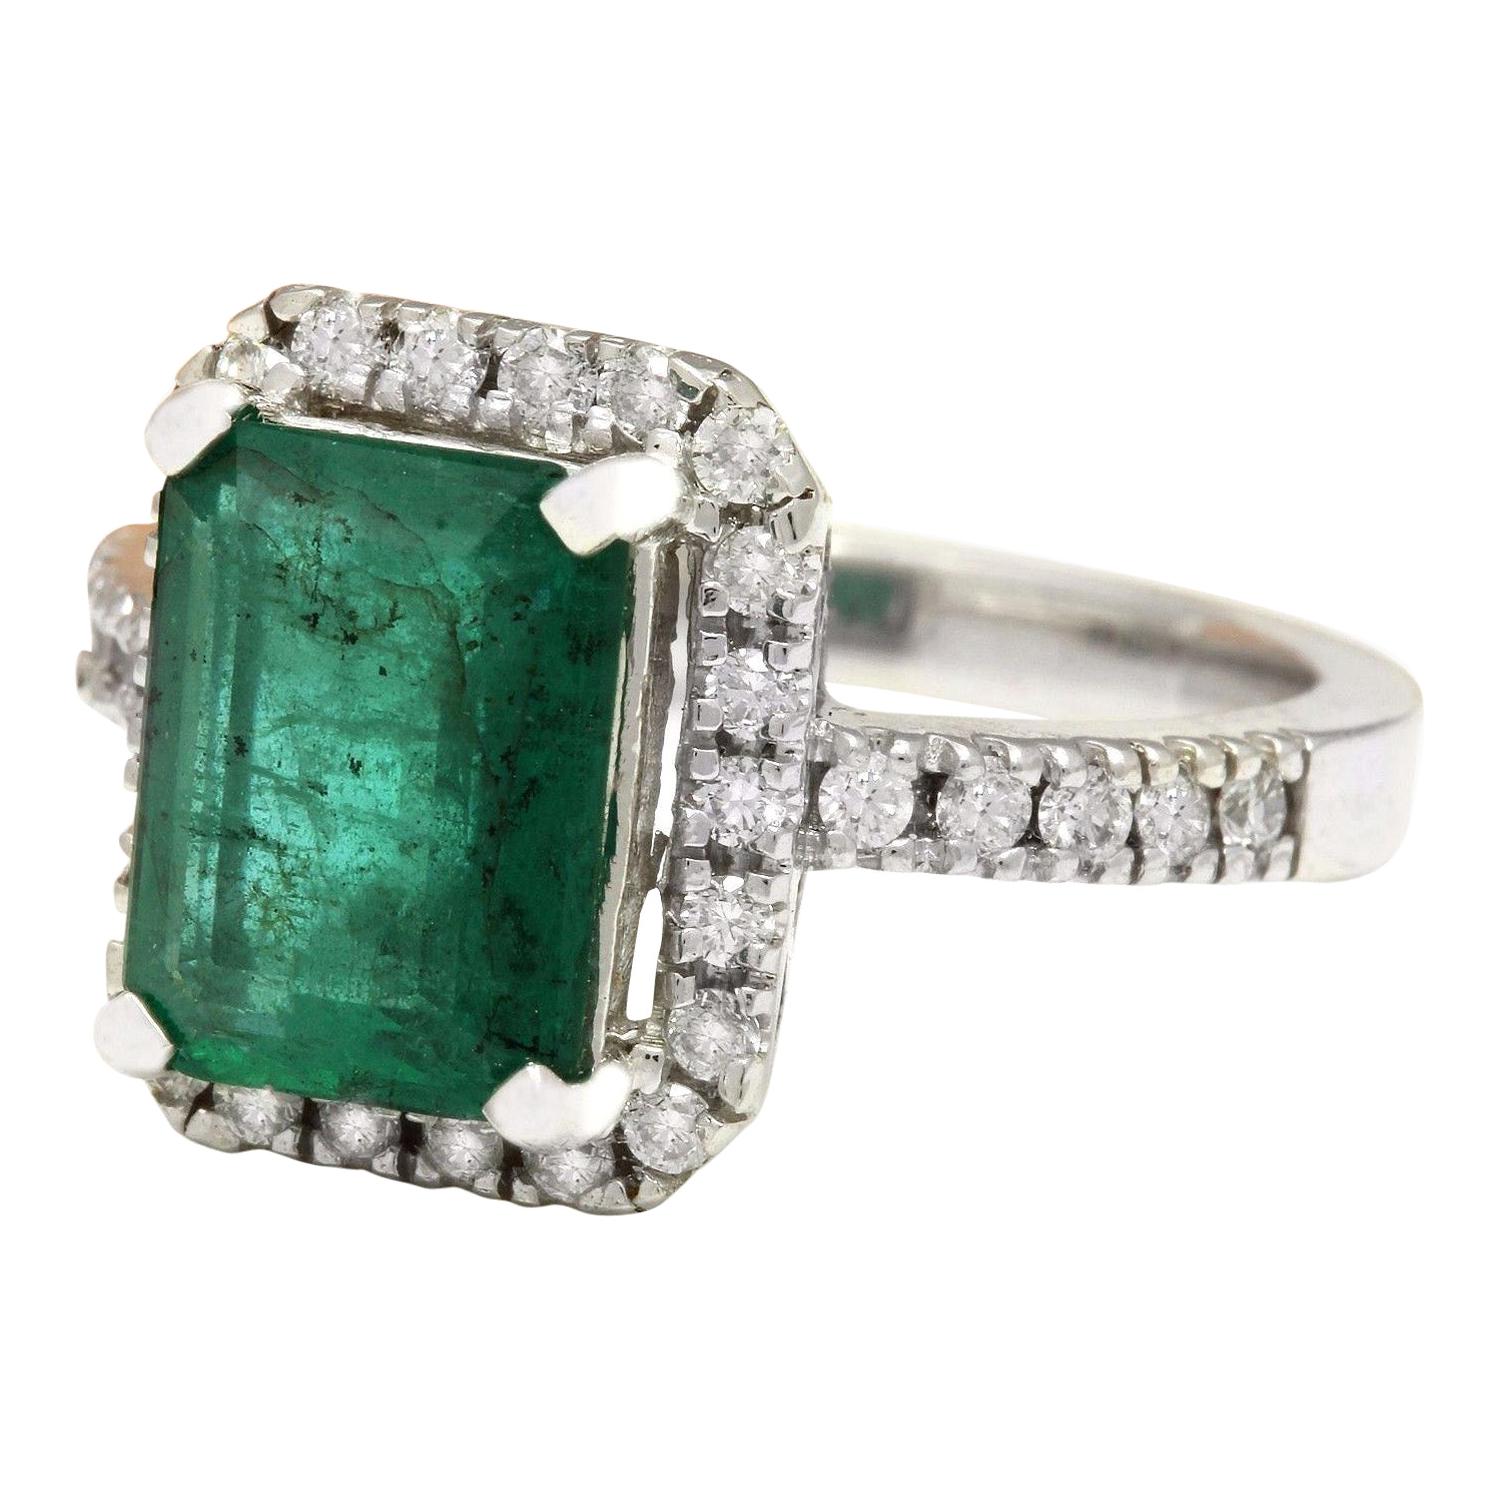 3.61 Carat Natural Emerald 14K Solid White Gold Diamond Ring
 Item Type: Ring
 Item Style: Engagement
 Material: 14K White Gold
 Mainstone: Emerald
 Stone Color: Green
 Stone Weight: 3.01 Carat
 Stone Shape: Emerald
 Stone Quantity: 1
 Stone